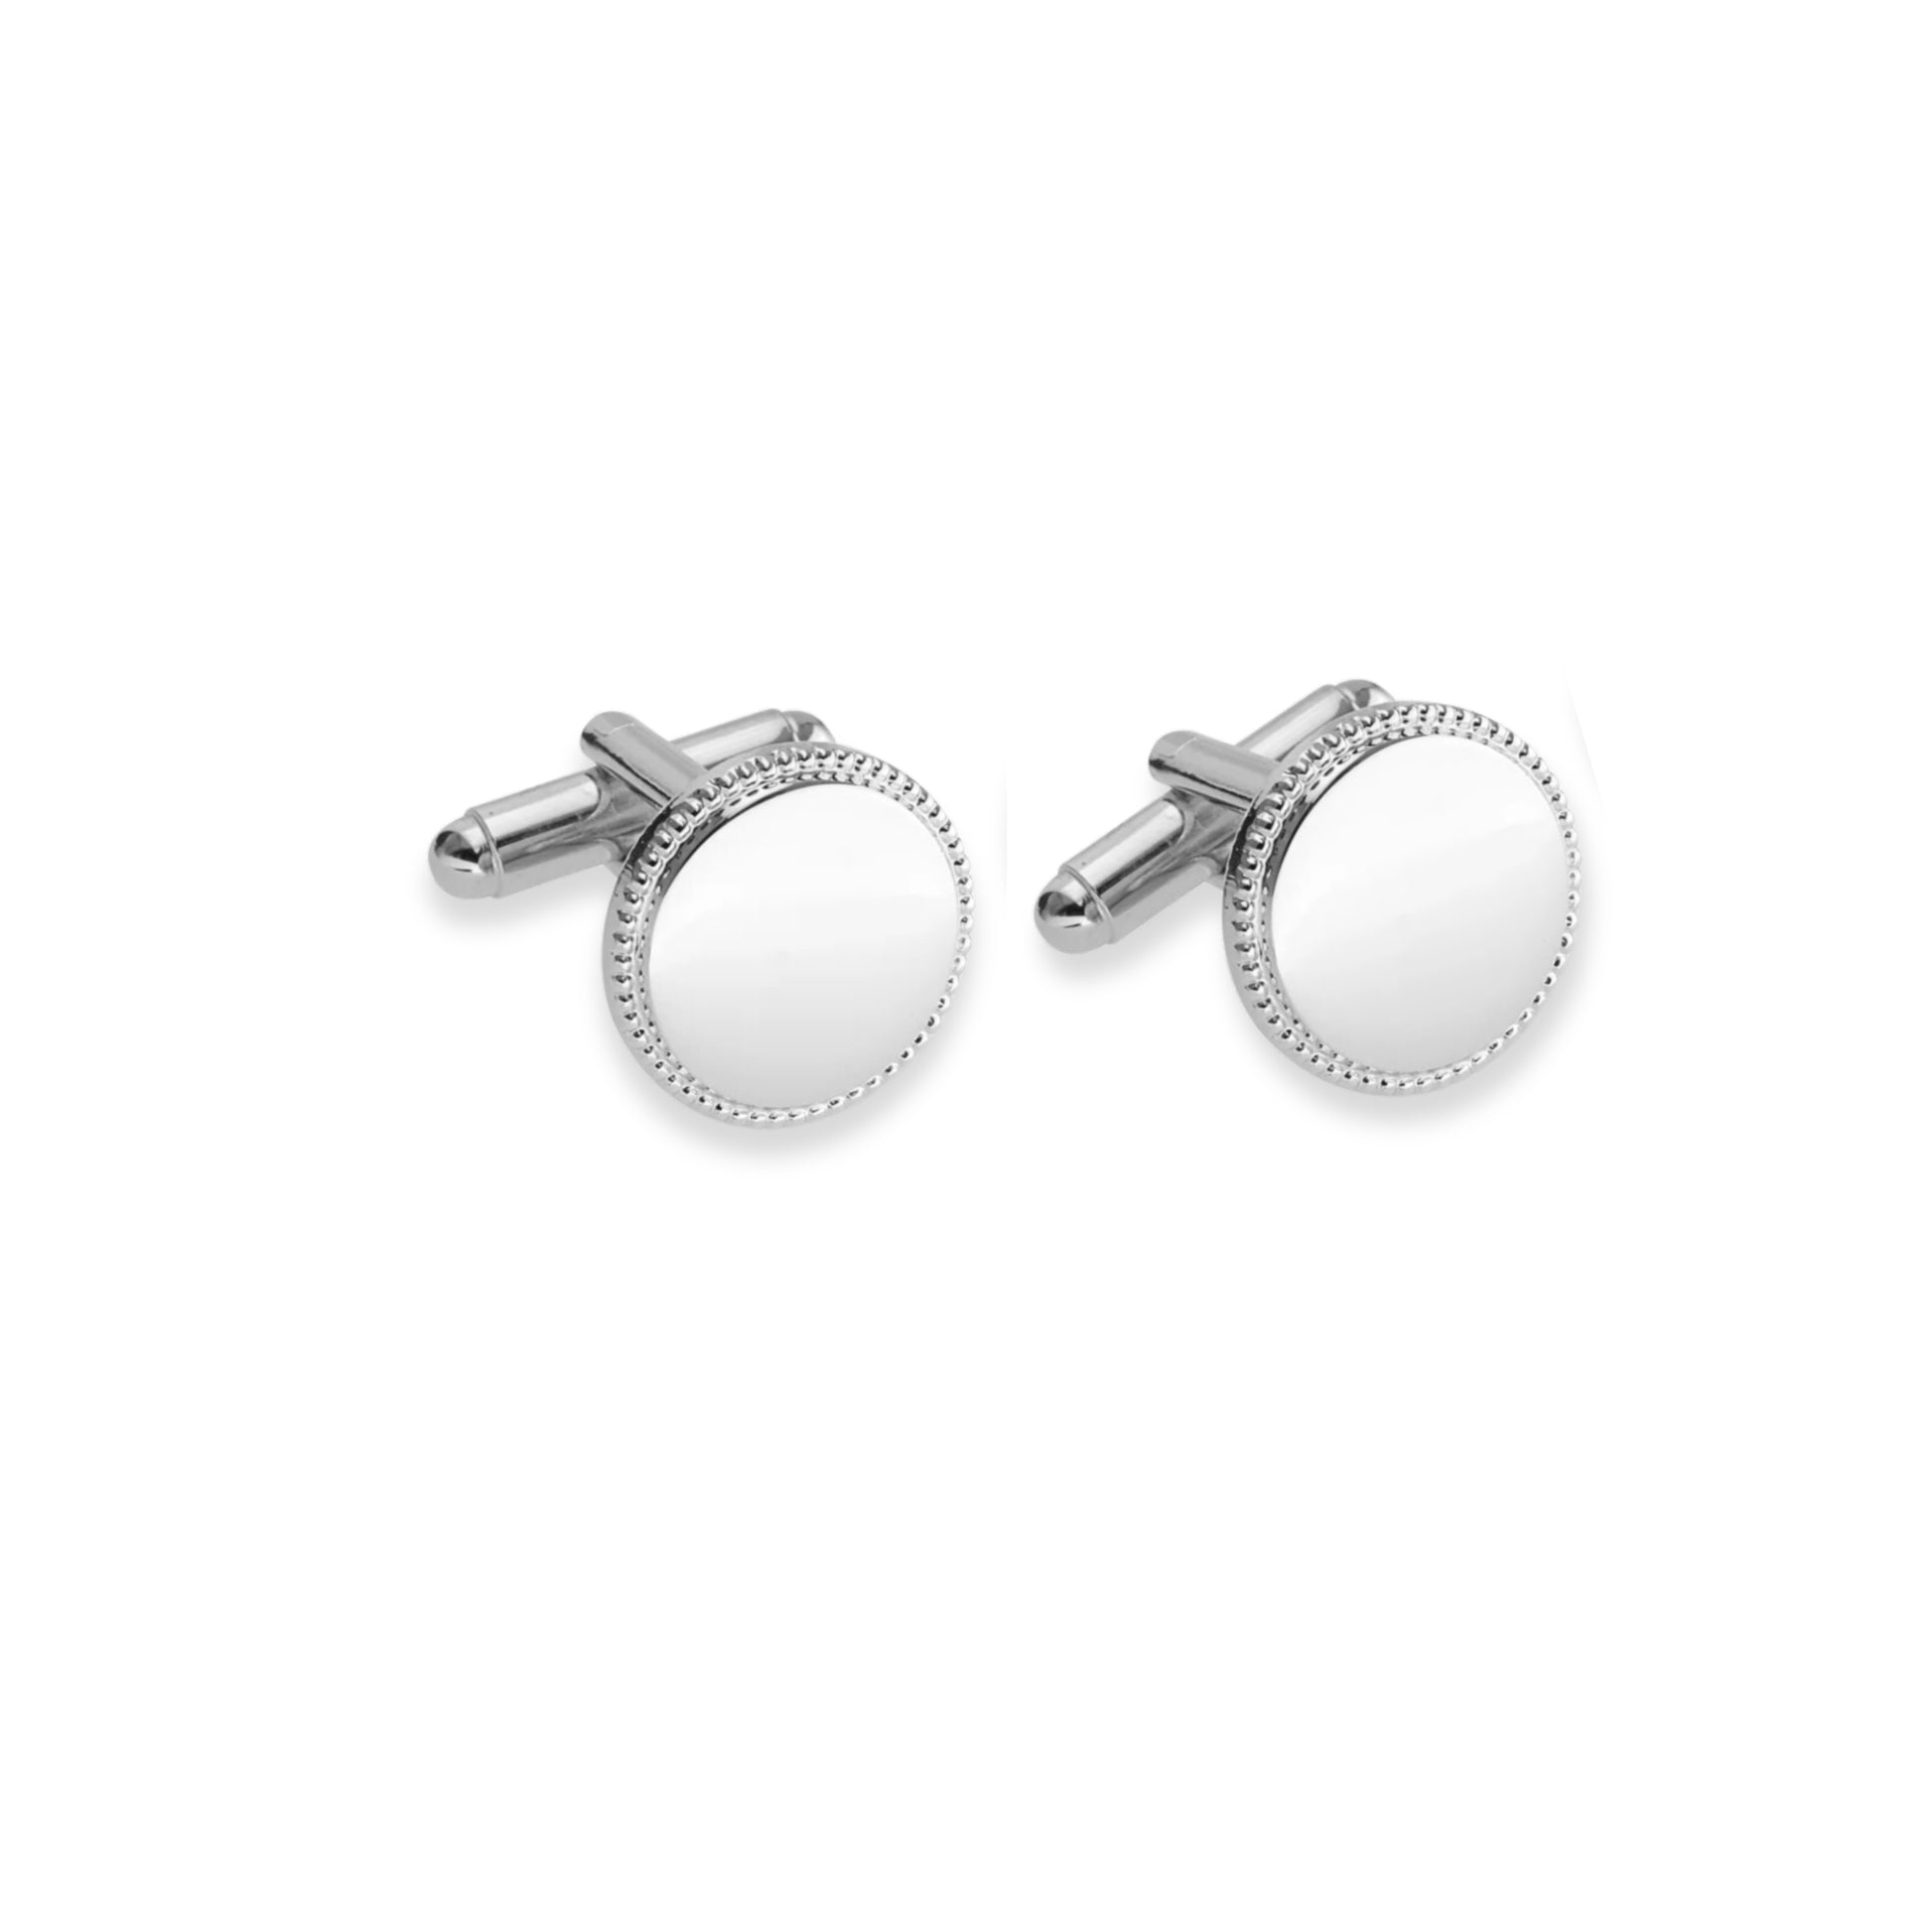 Sterling Silver Round Cufflinks with Beaded Edge